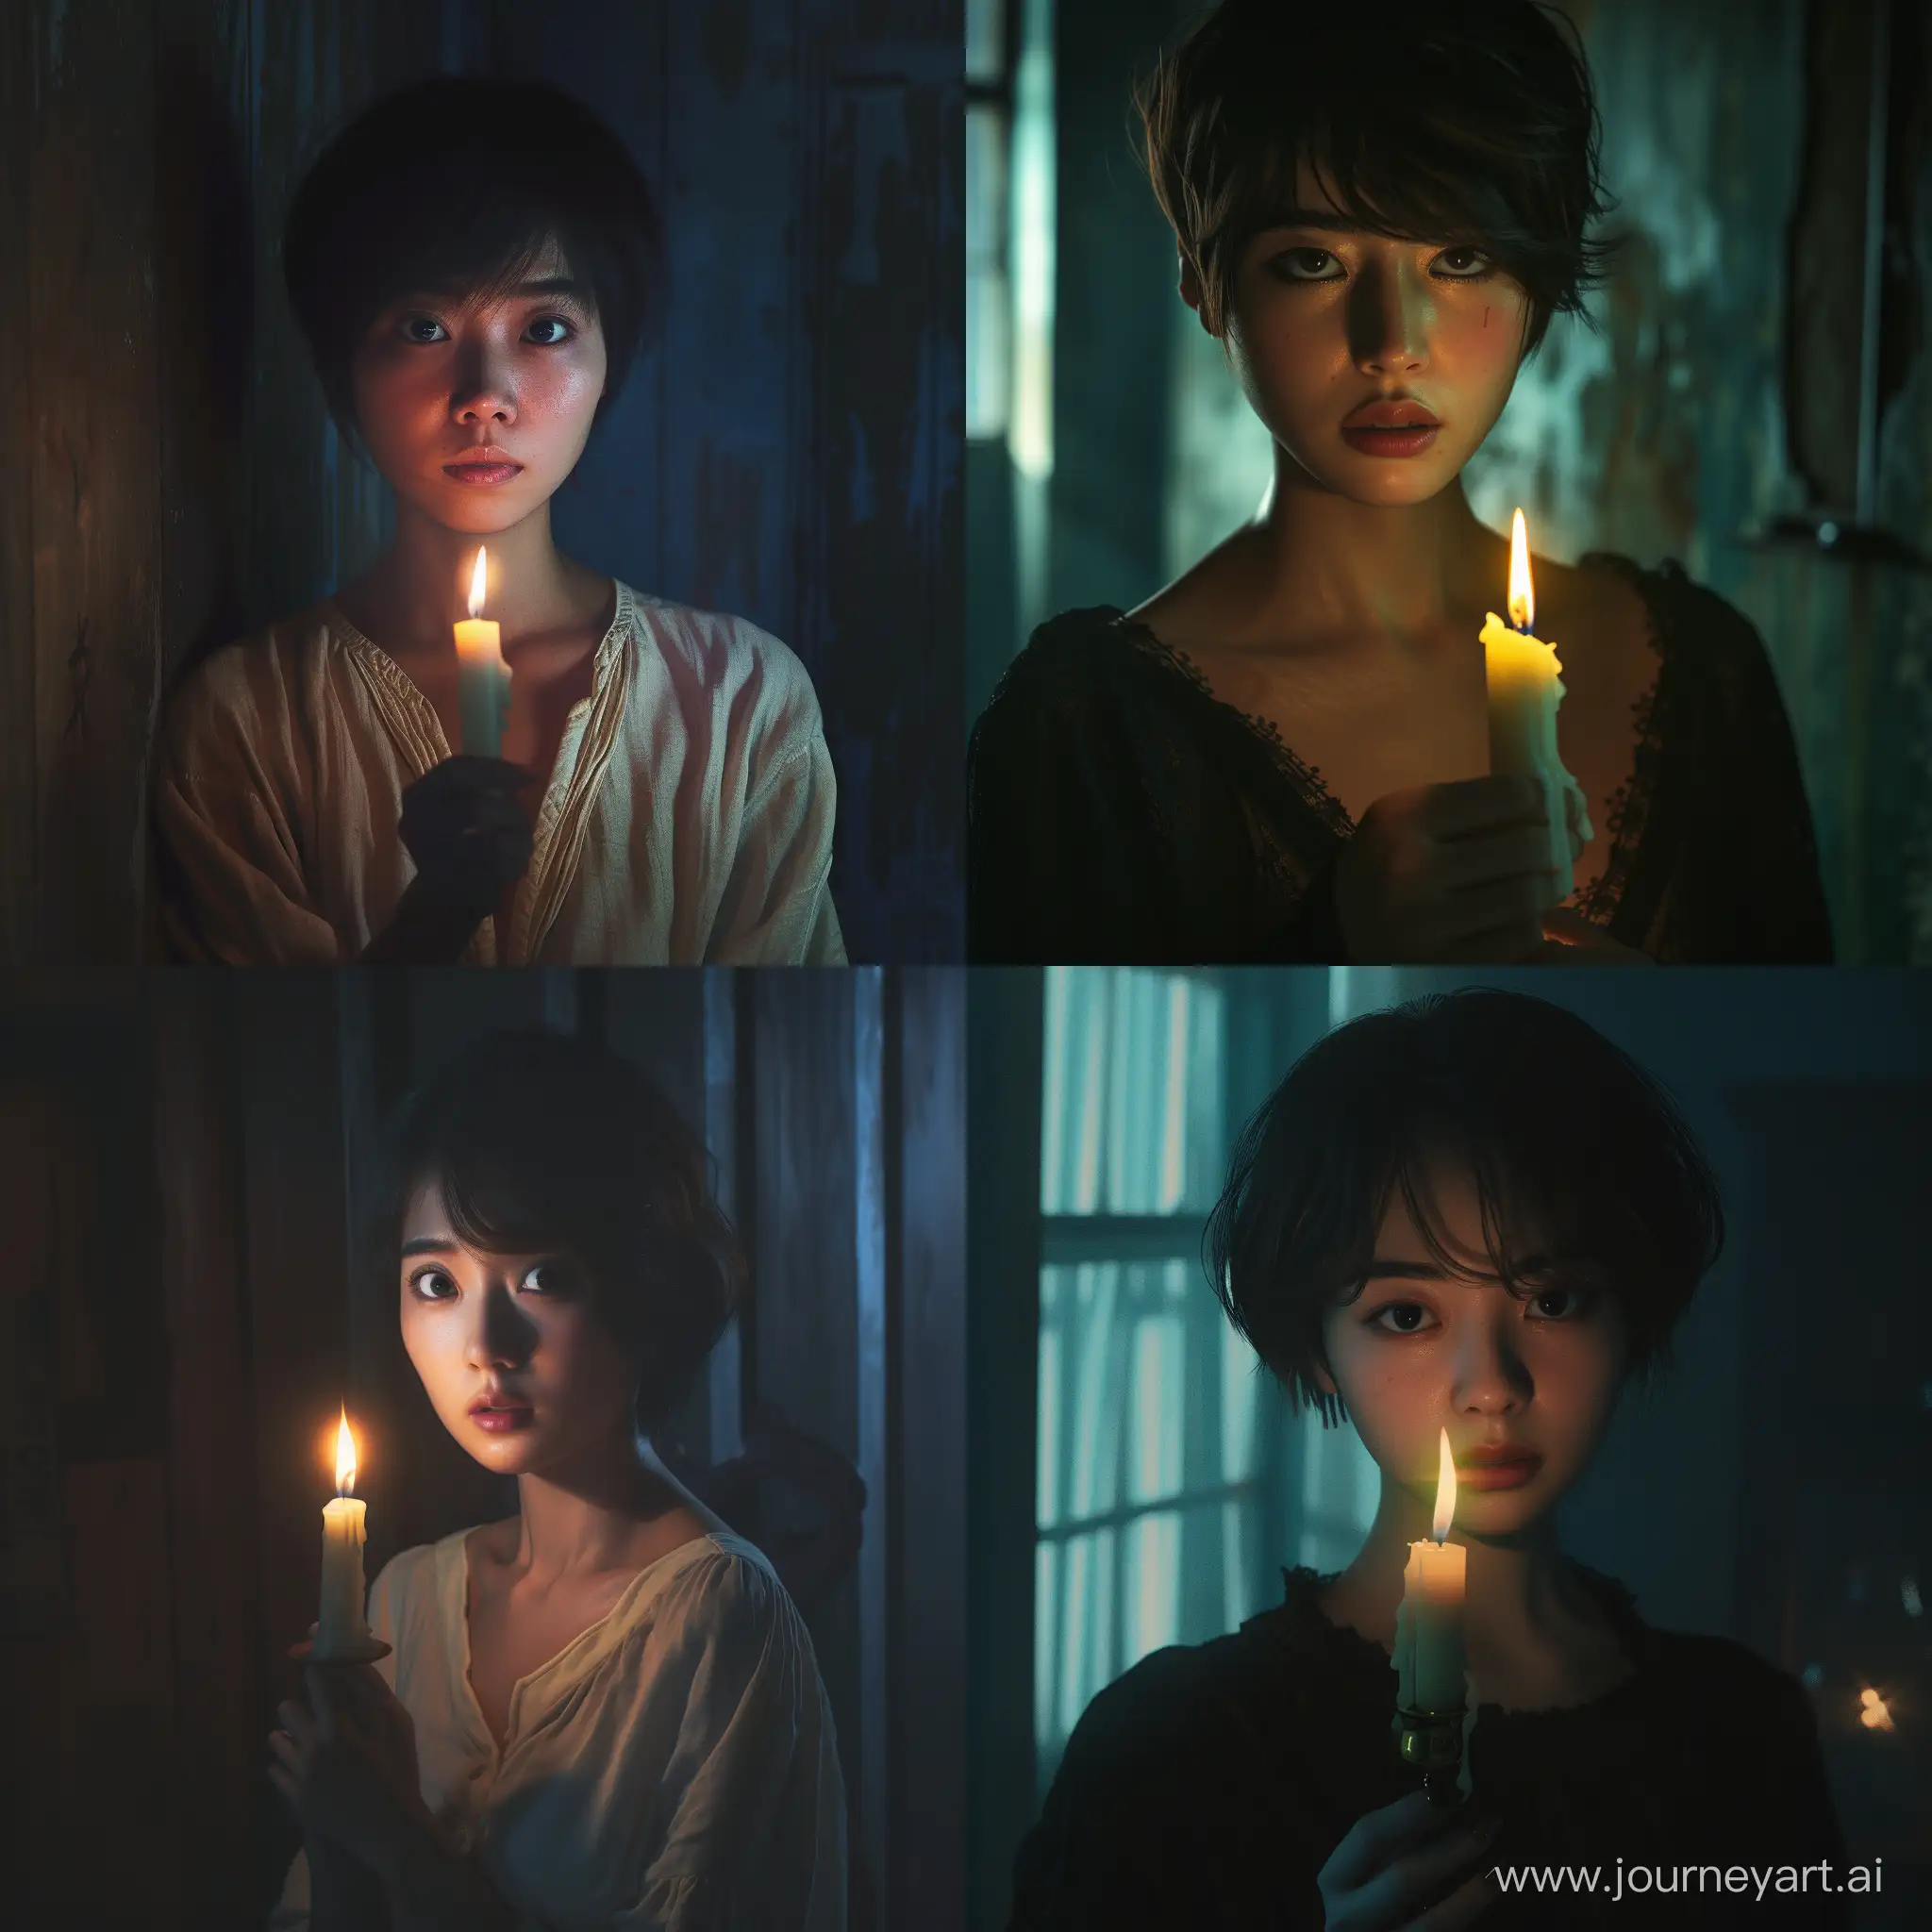 Mysterious-Asian-Woman-with-Flickering-Candle-in-Dimly-Lit-Room